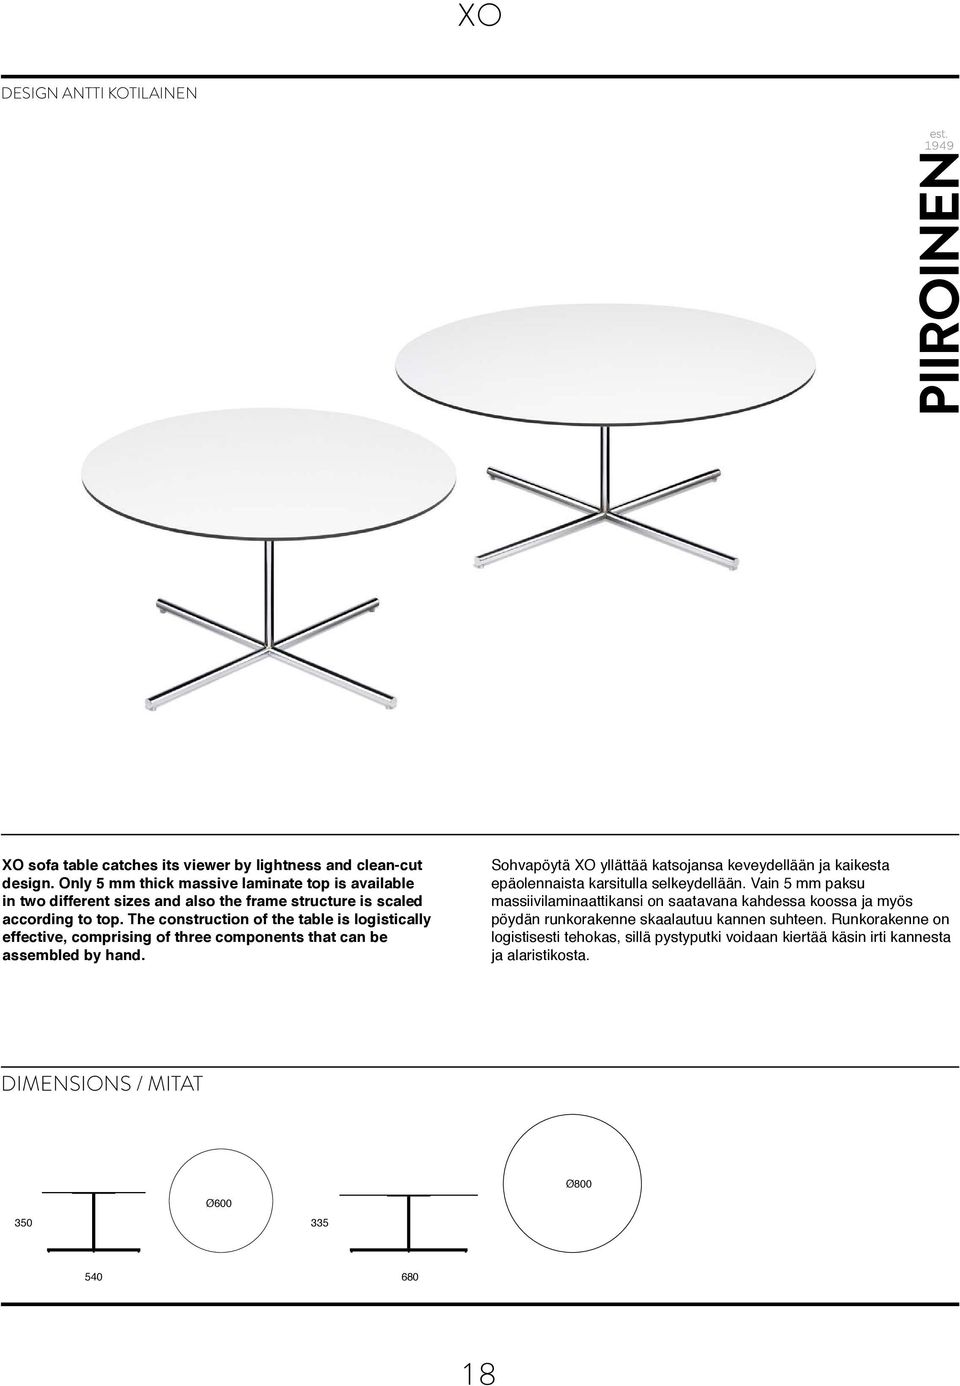 The construction of the table is logistically effective, comprising of three components that can be assembled by hand.